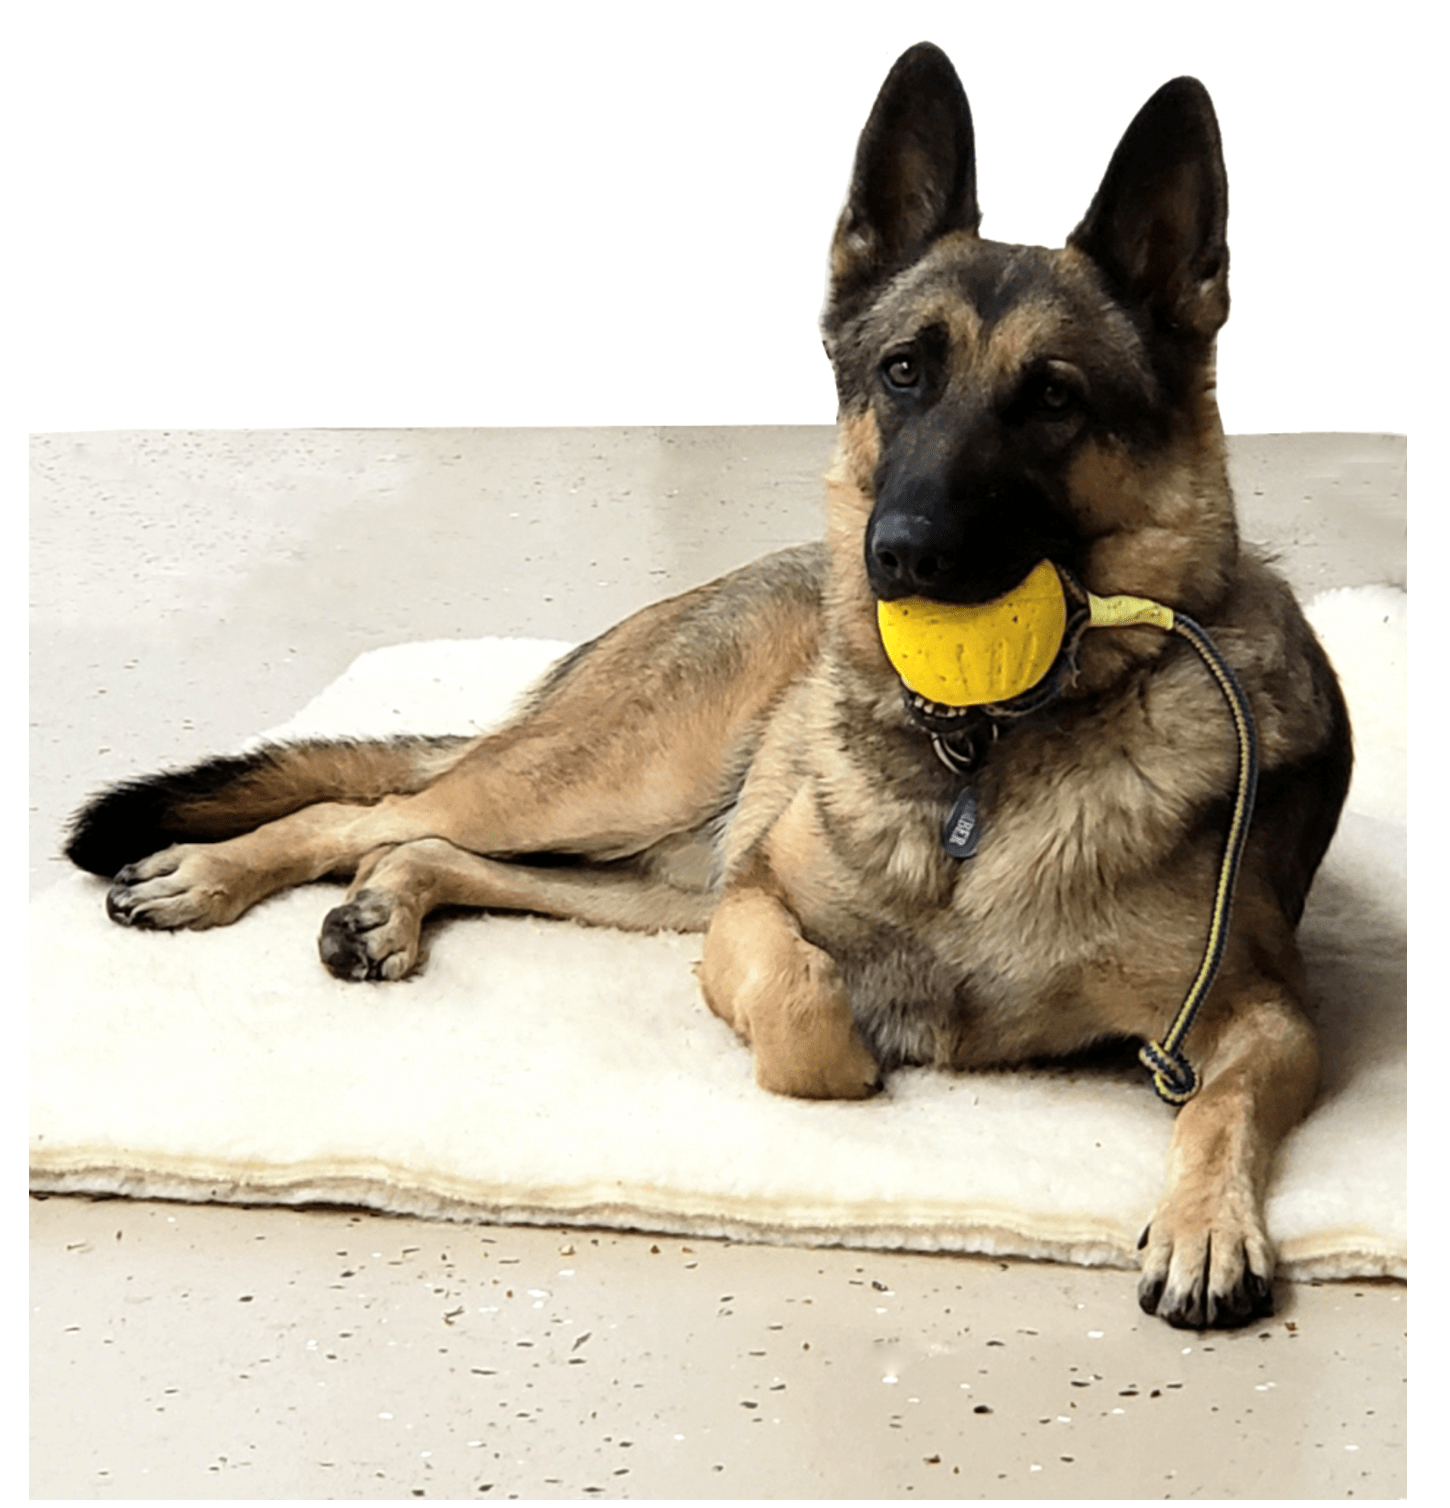 High Quality Tug Toy for Puppies and Dog Very Durable pets-park-pk